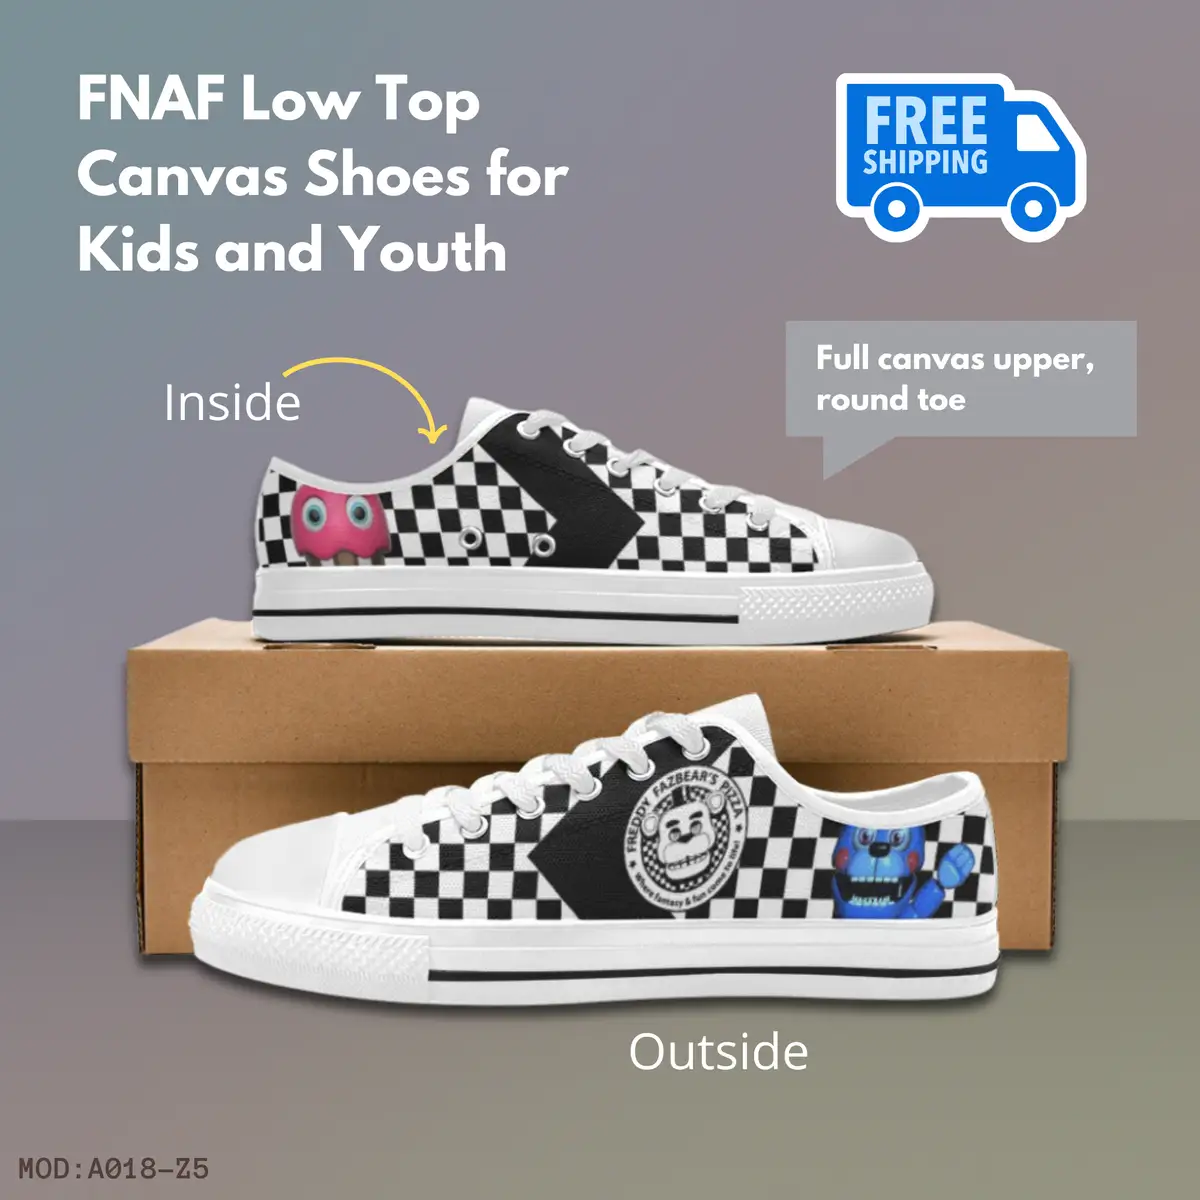 Five Nights at Freddy’s Chess pattern Low-Top Sneakers – FNAF Shoes with Freddy’s Pizza Logo, Cupcake and Bonnie, For Kids and Youth Cool Kiddo 12